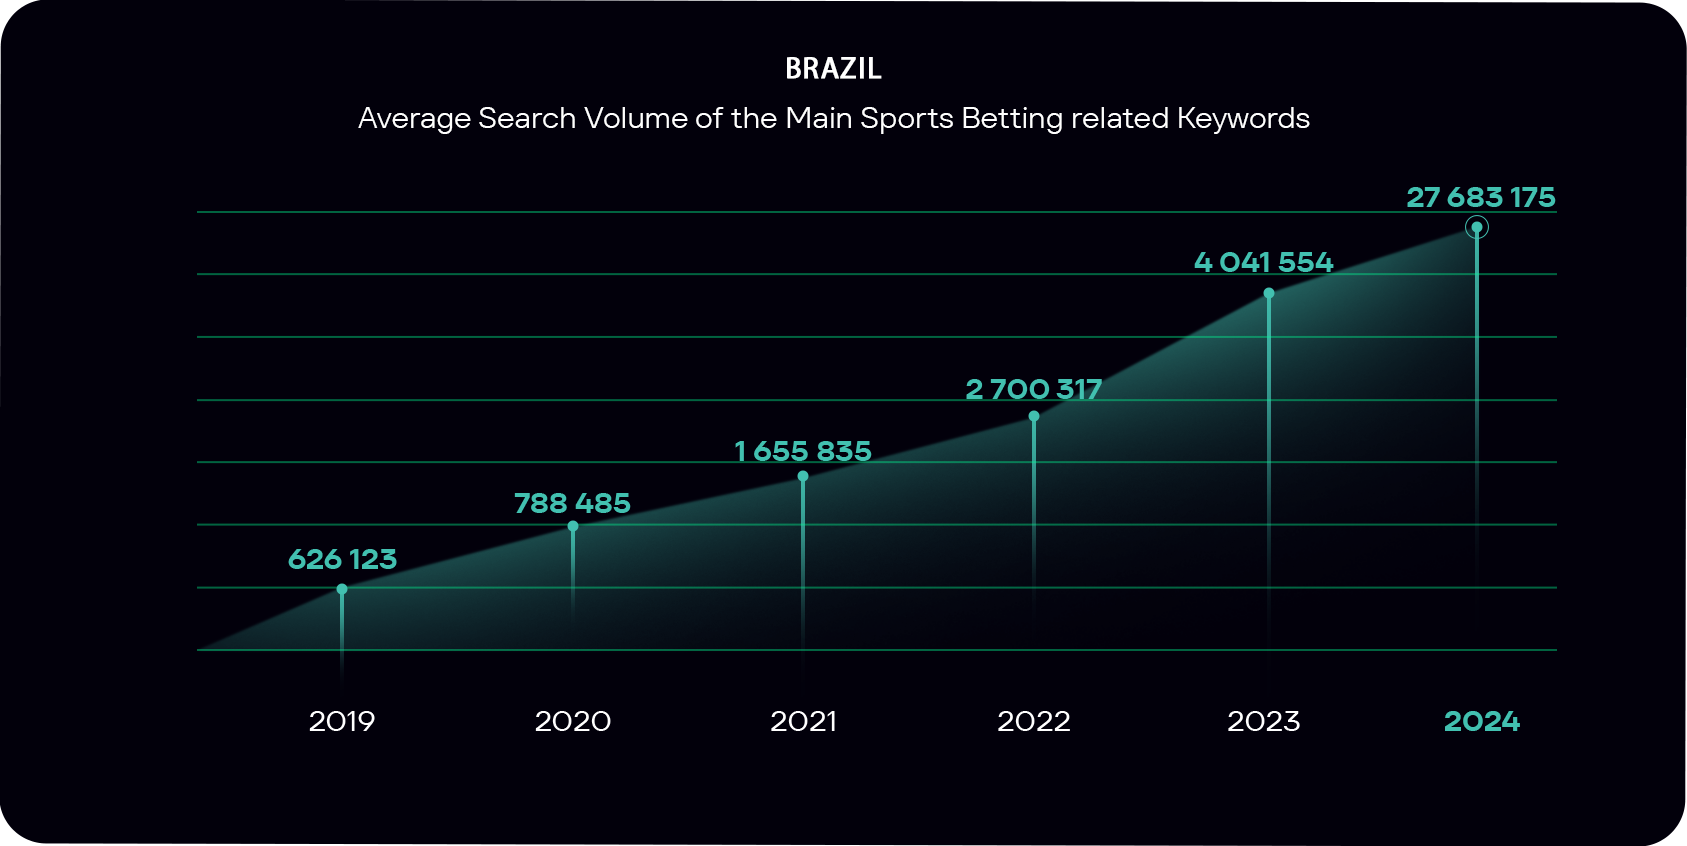 The Chart depicting the increase in the usage of main sports betting related keywords used in Brazil